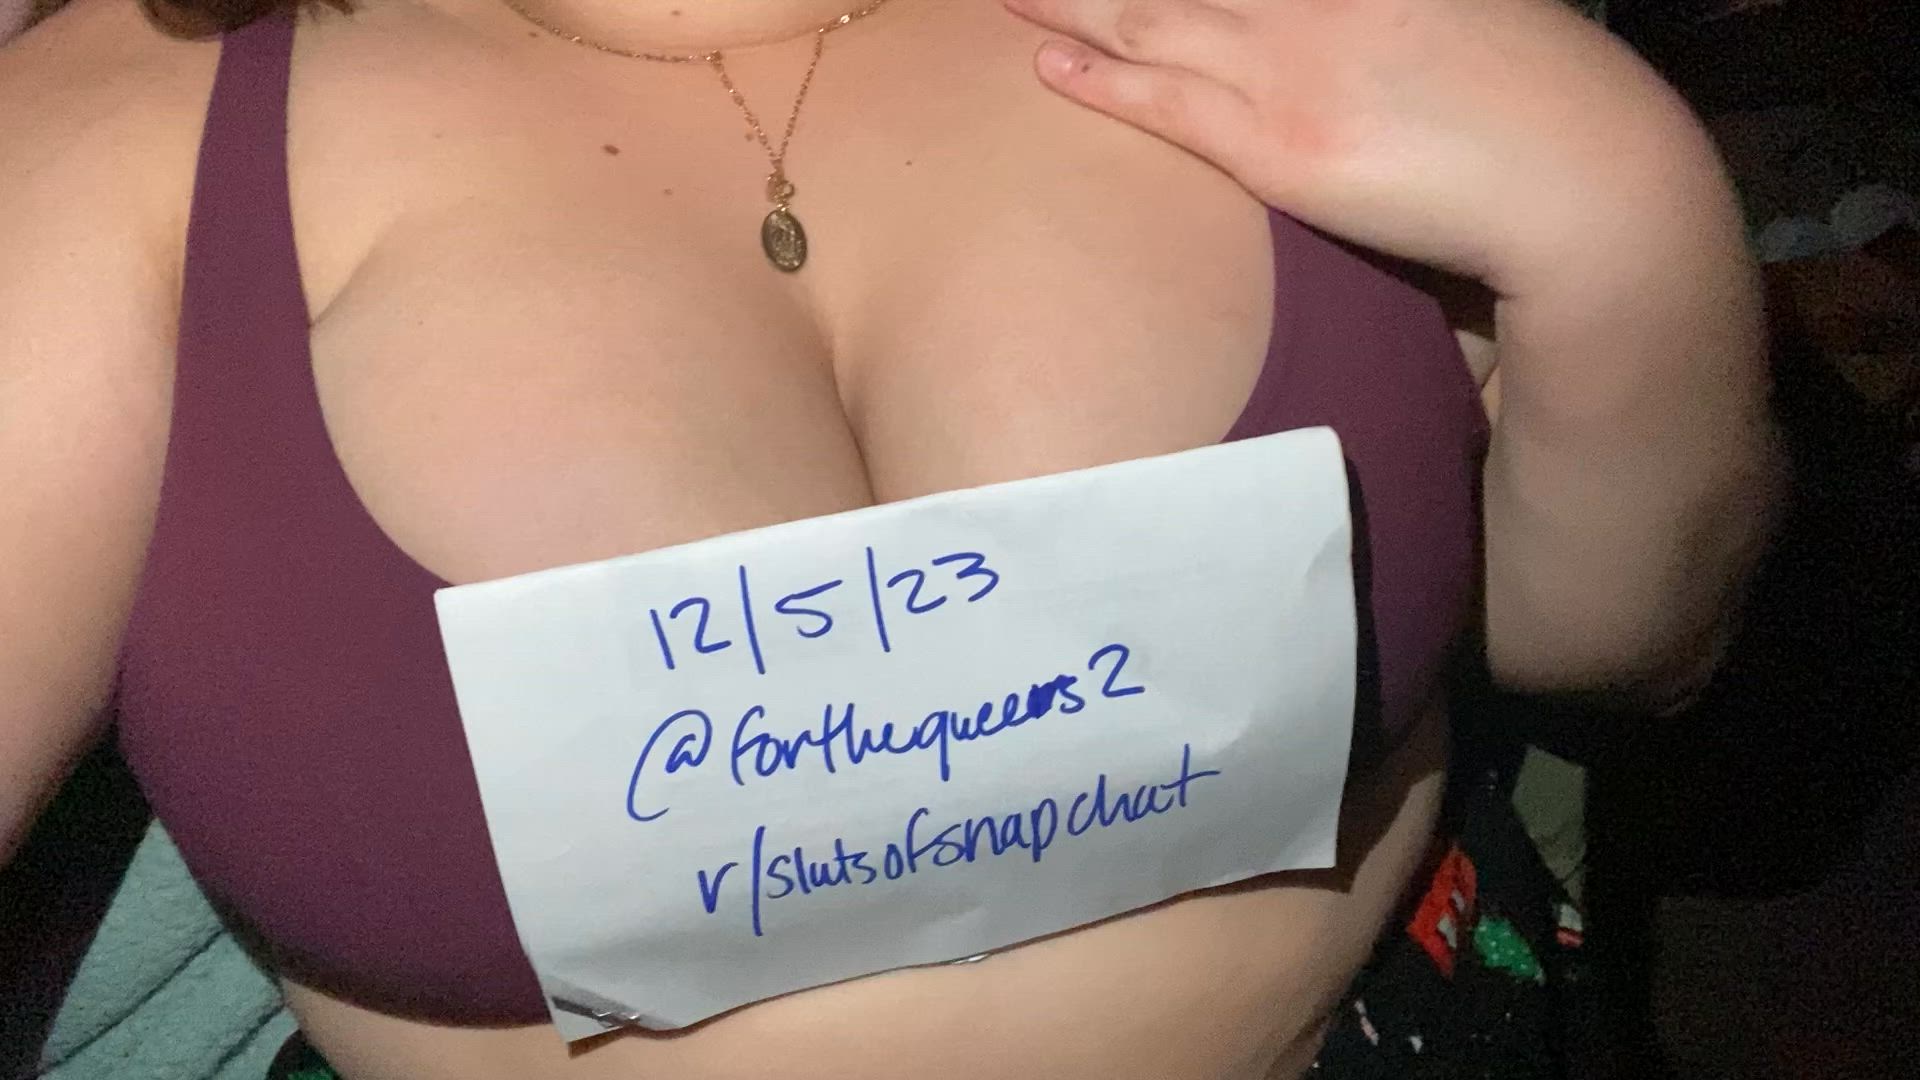 Big Tits porn video with onlyfans model gigi <strong>@forthequeers</strong>